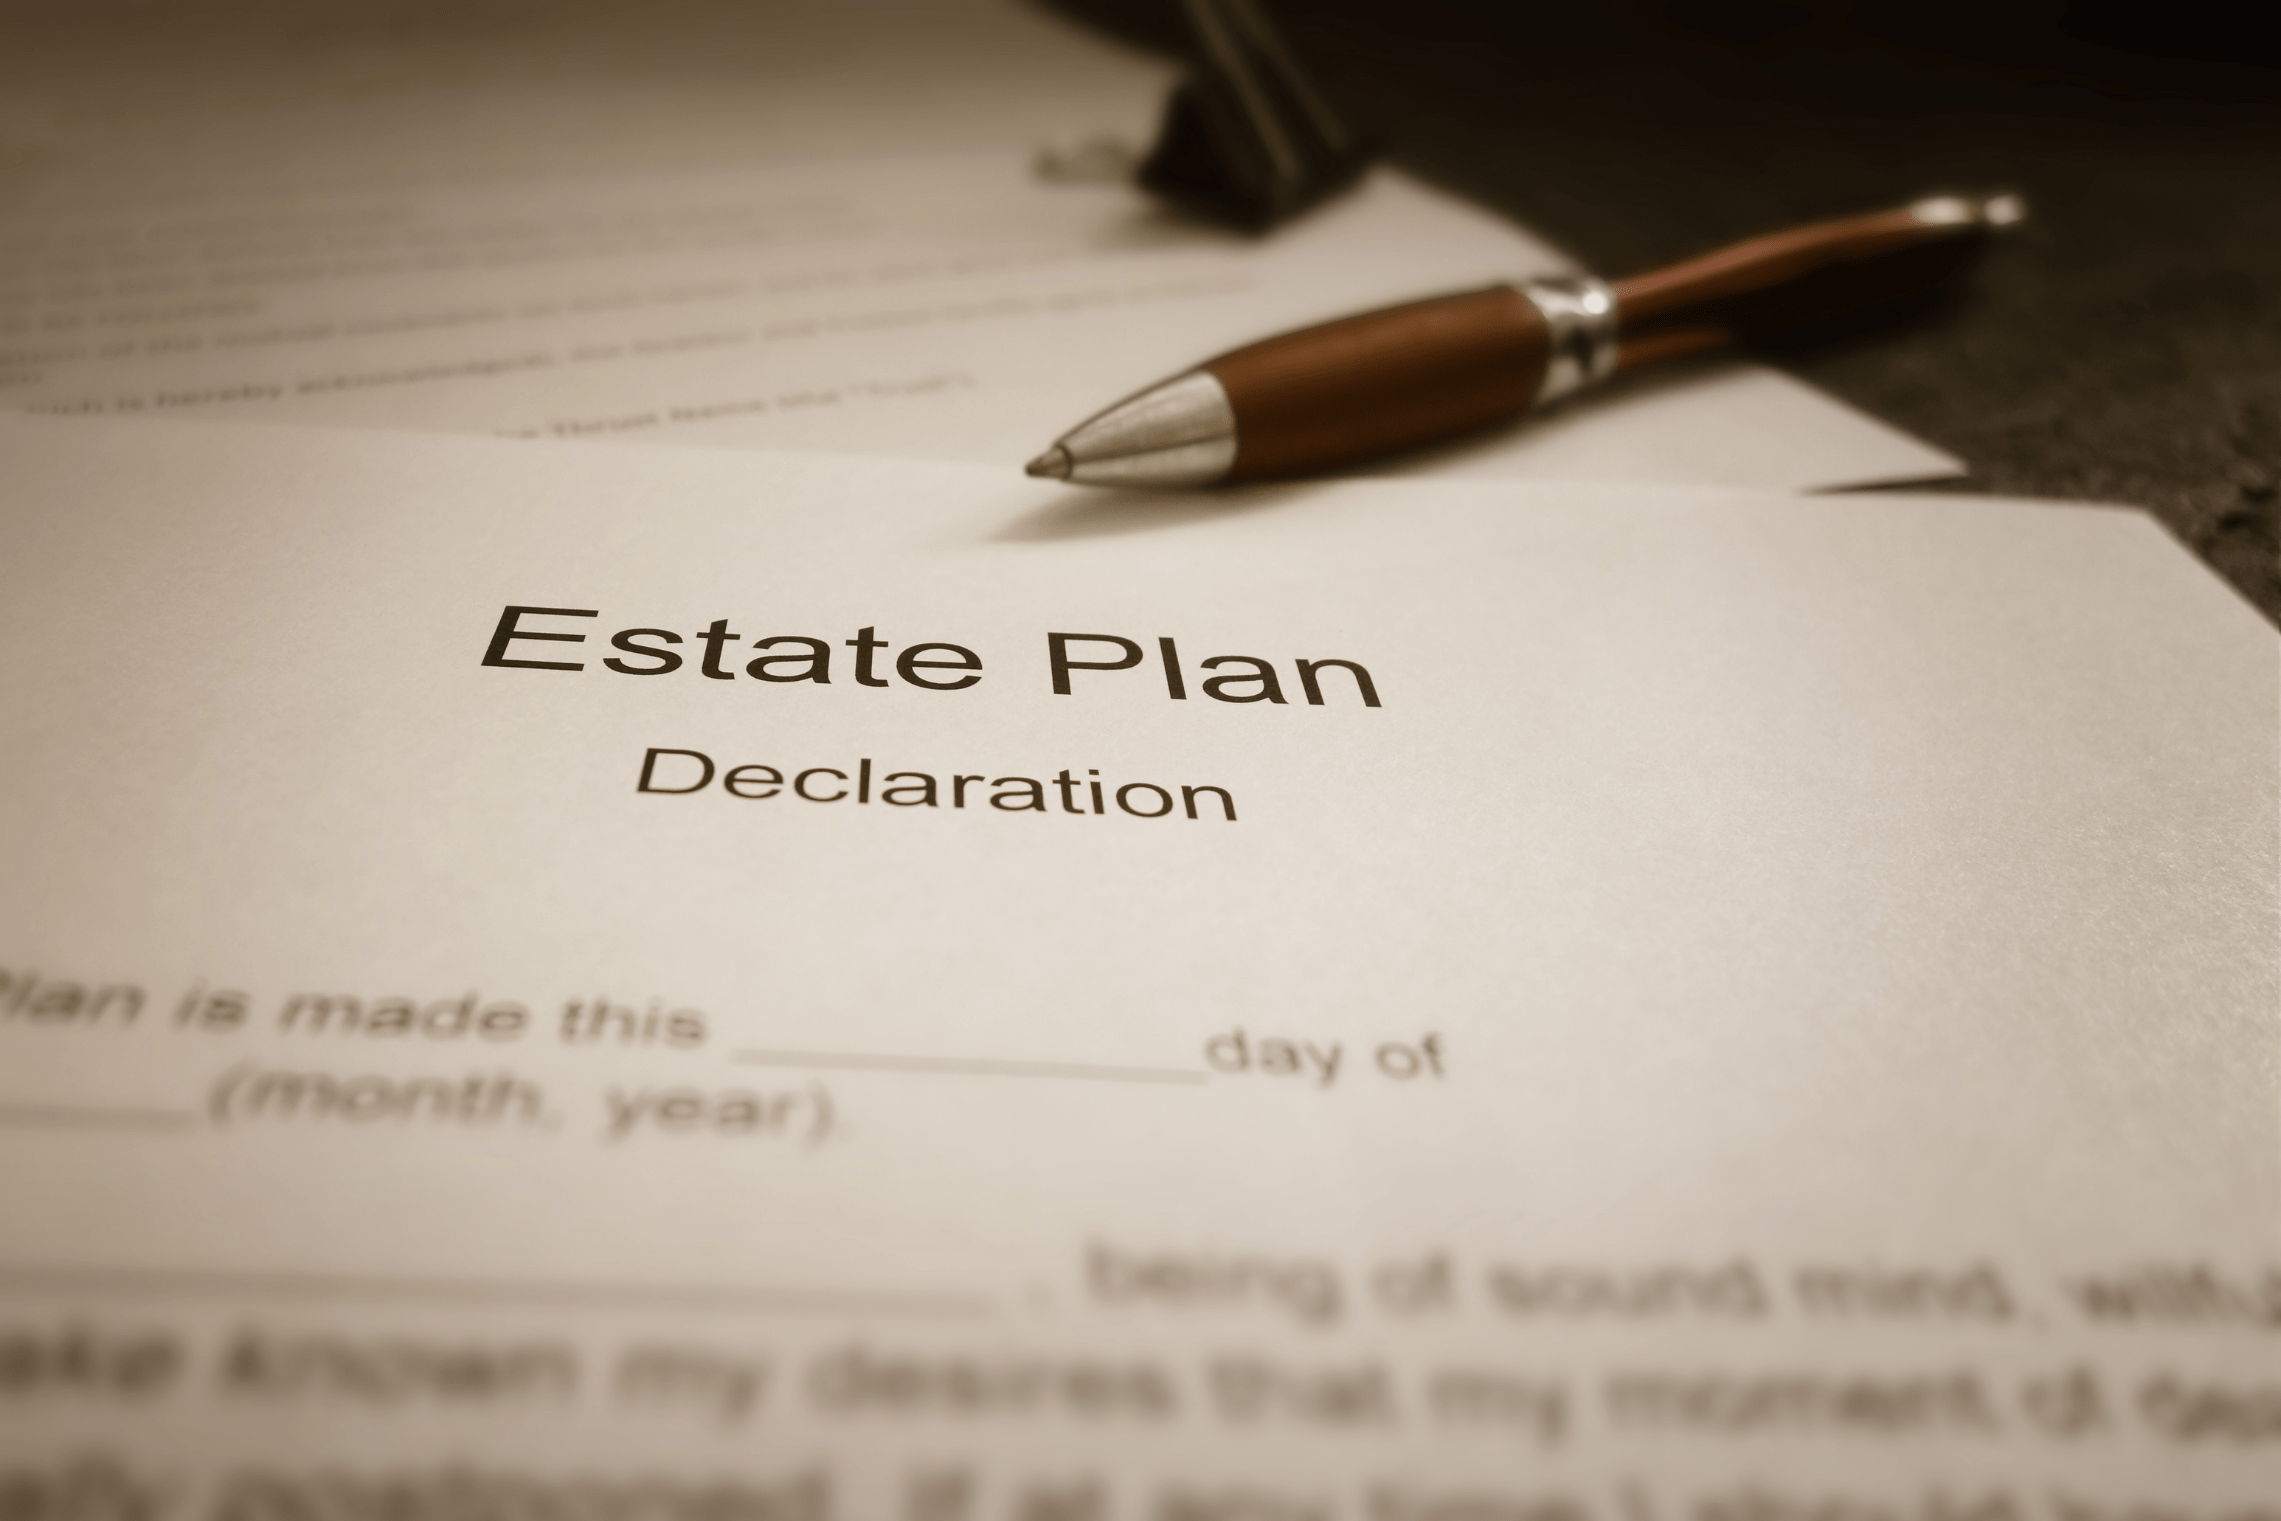 An image of estate planning documents with a pen.